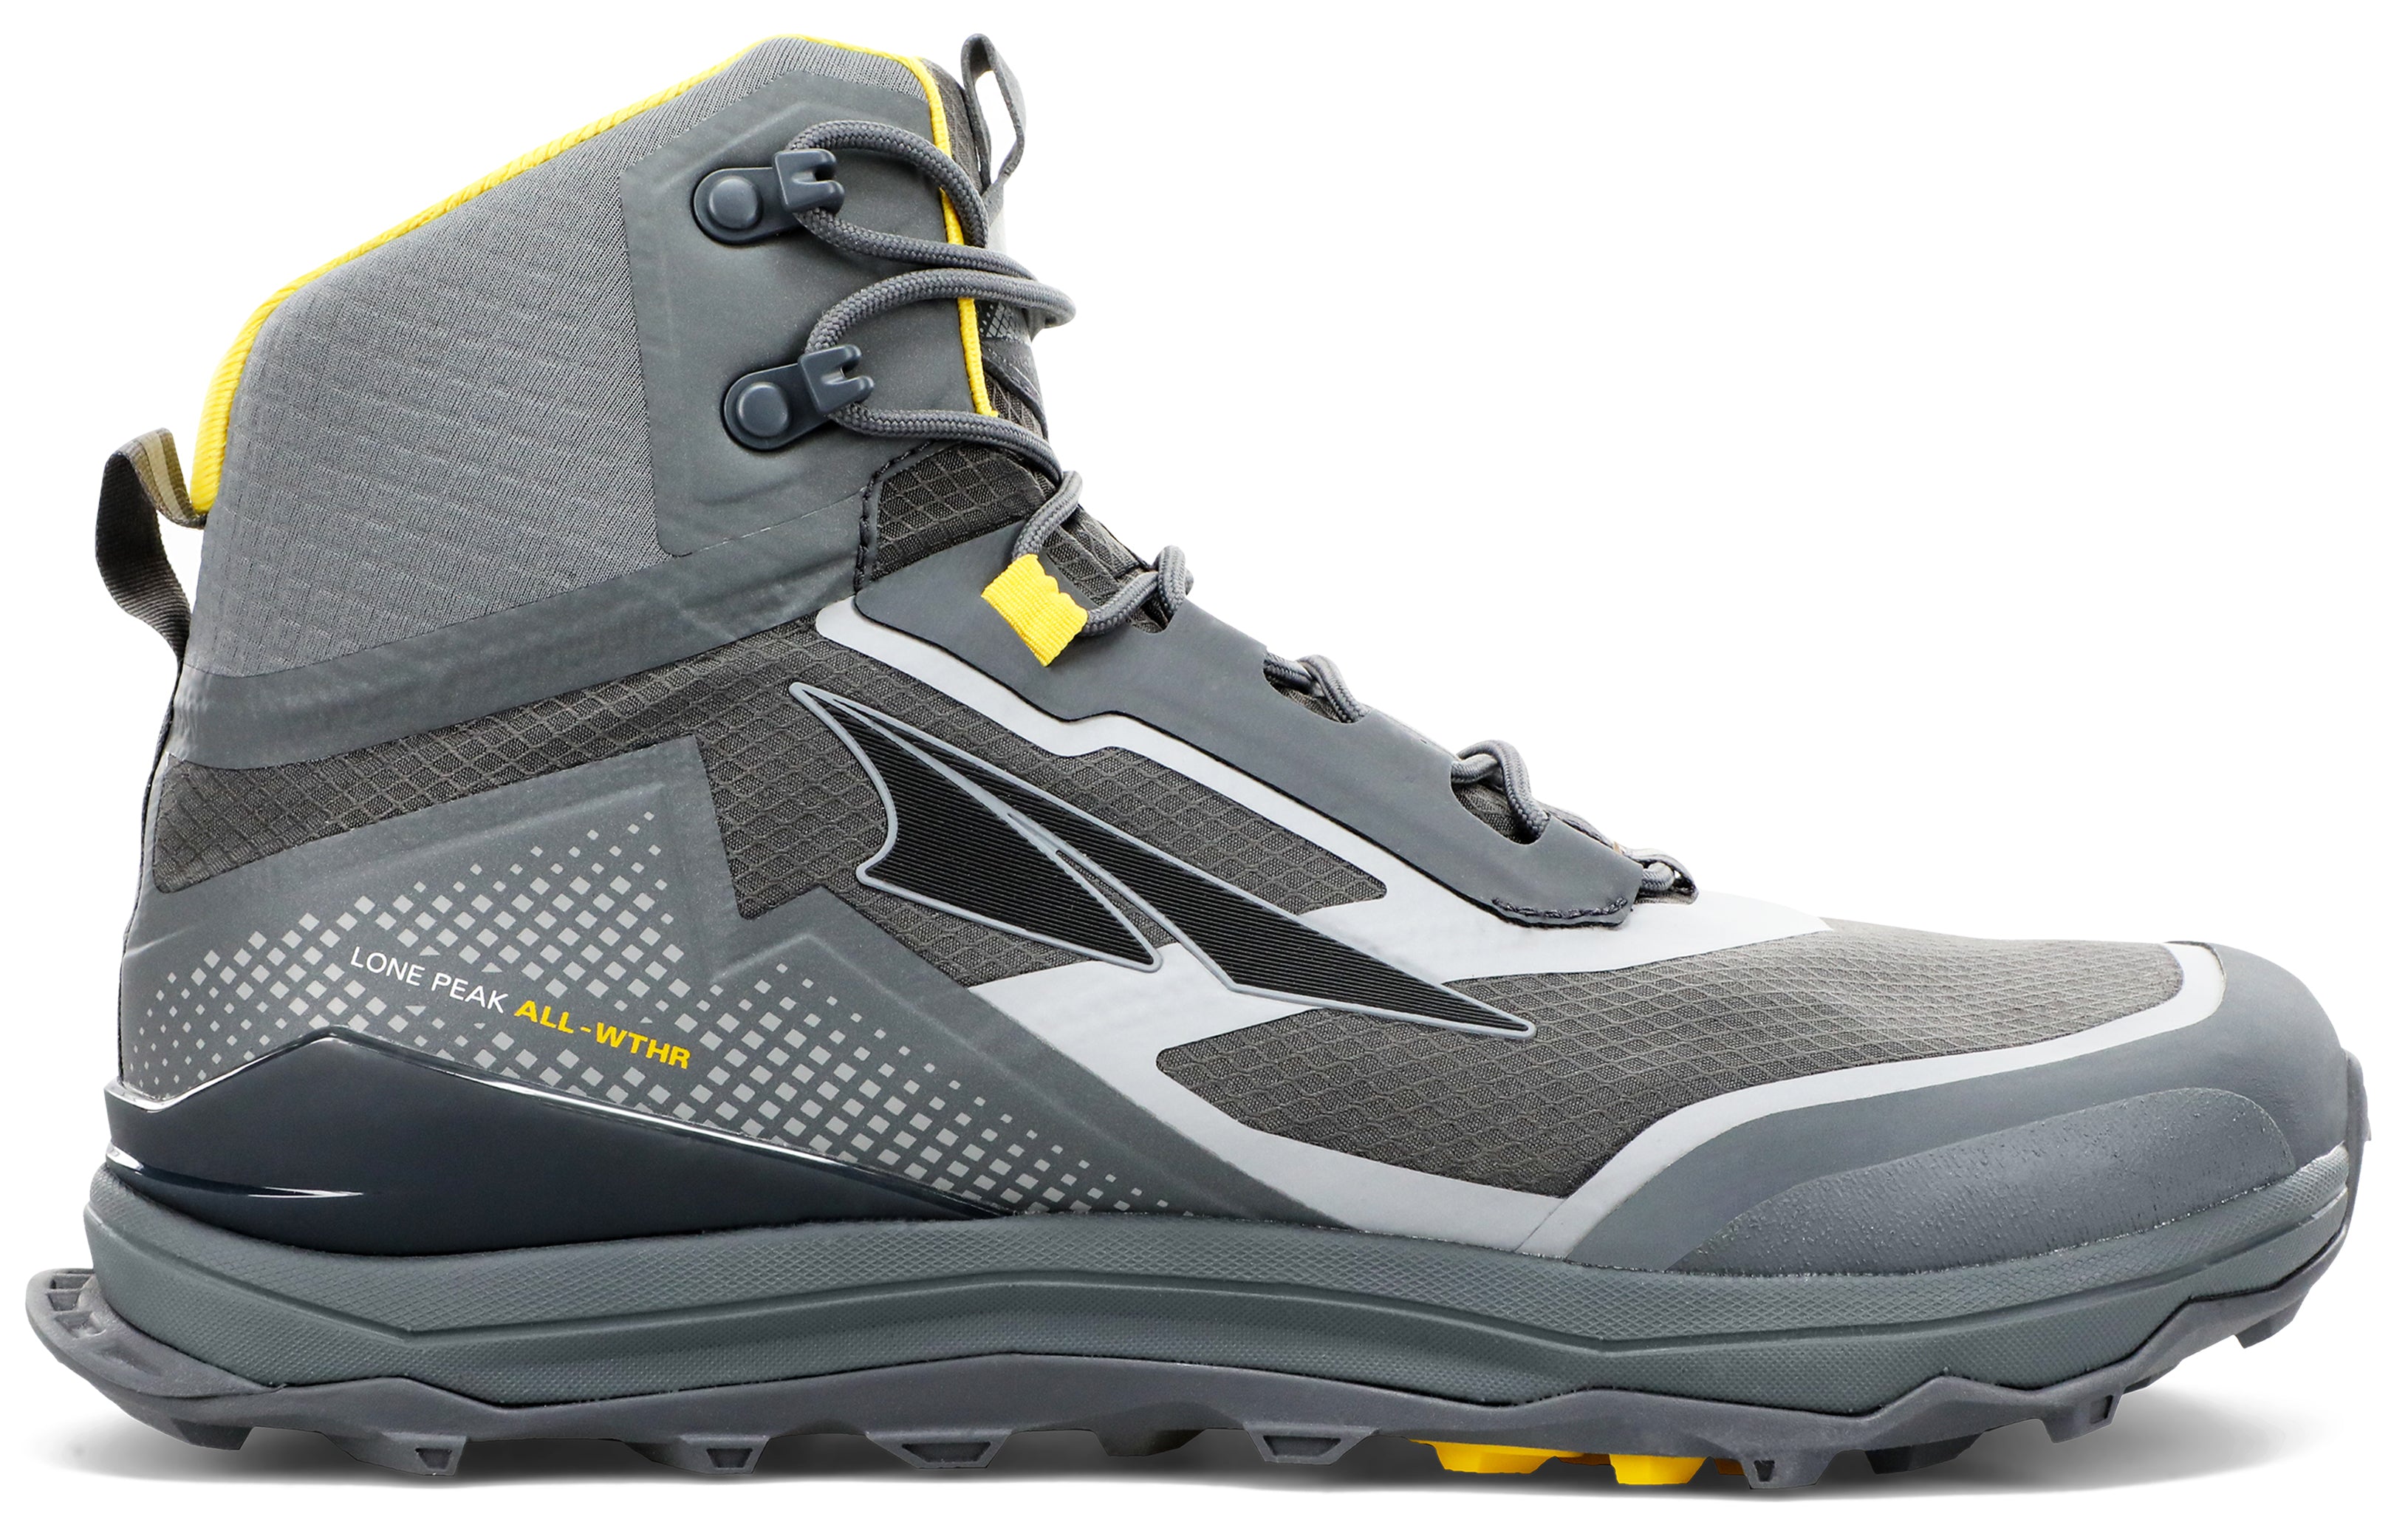 Altra Men's Lone Peak ALL-WTHR Mid Trail Running Shoe in Gray/Yellow from the side